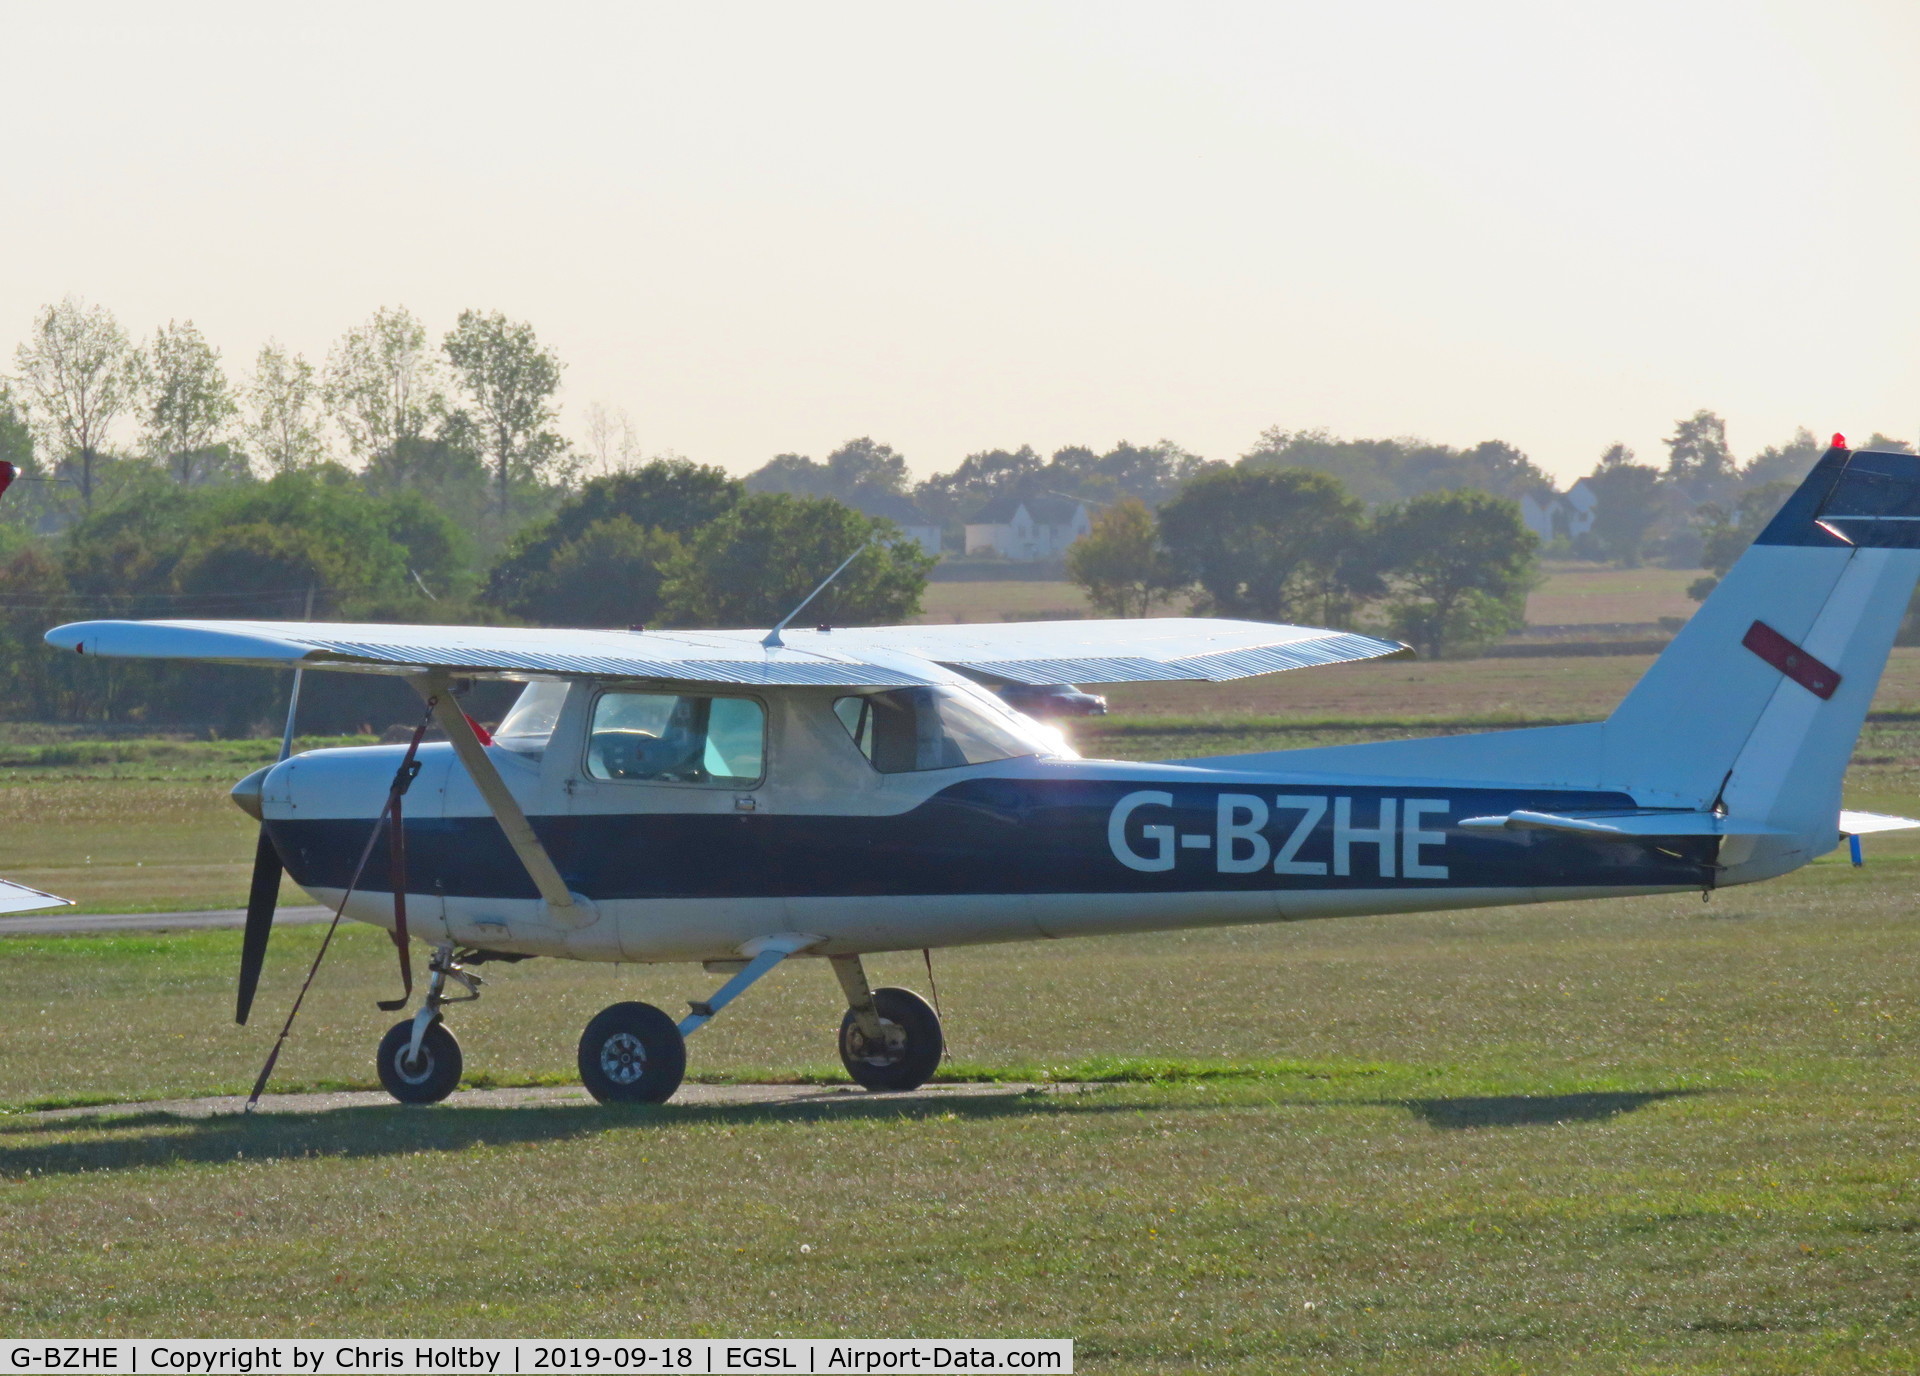 G-BZHE, 1978 Cessna 152 C/N 152-81303, Parked at Andrewsfield